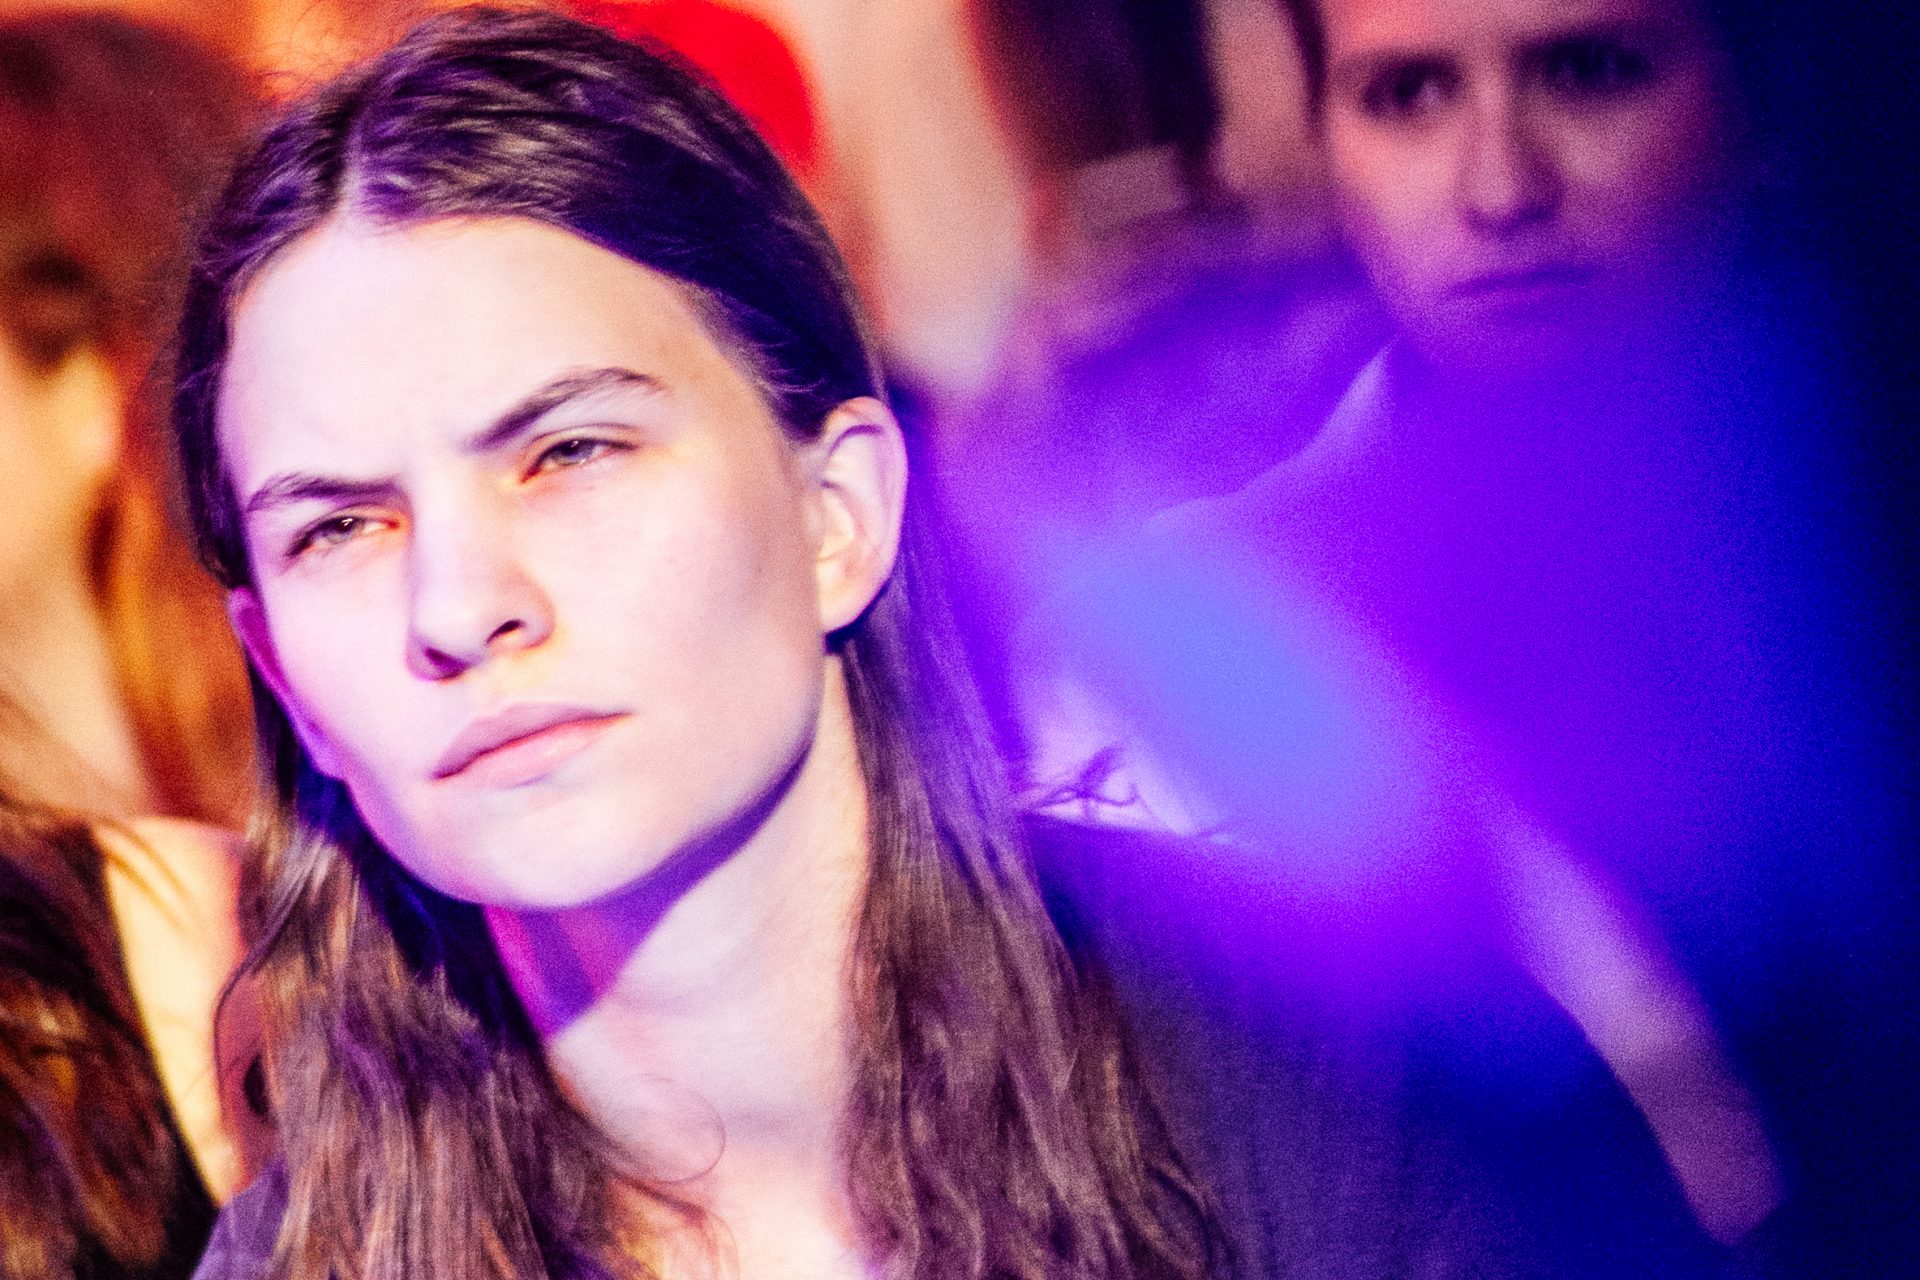 Meet Sting's non-binary child, Eliot Sumner, who stars in 'Ripley'